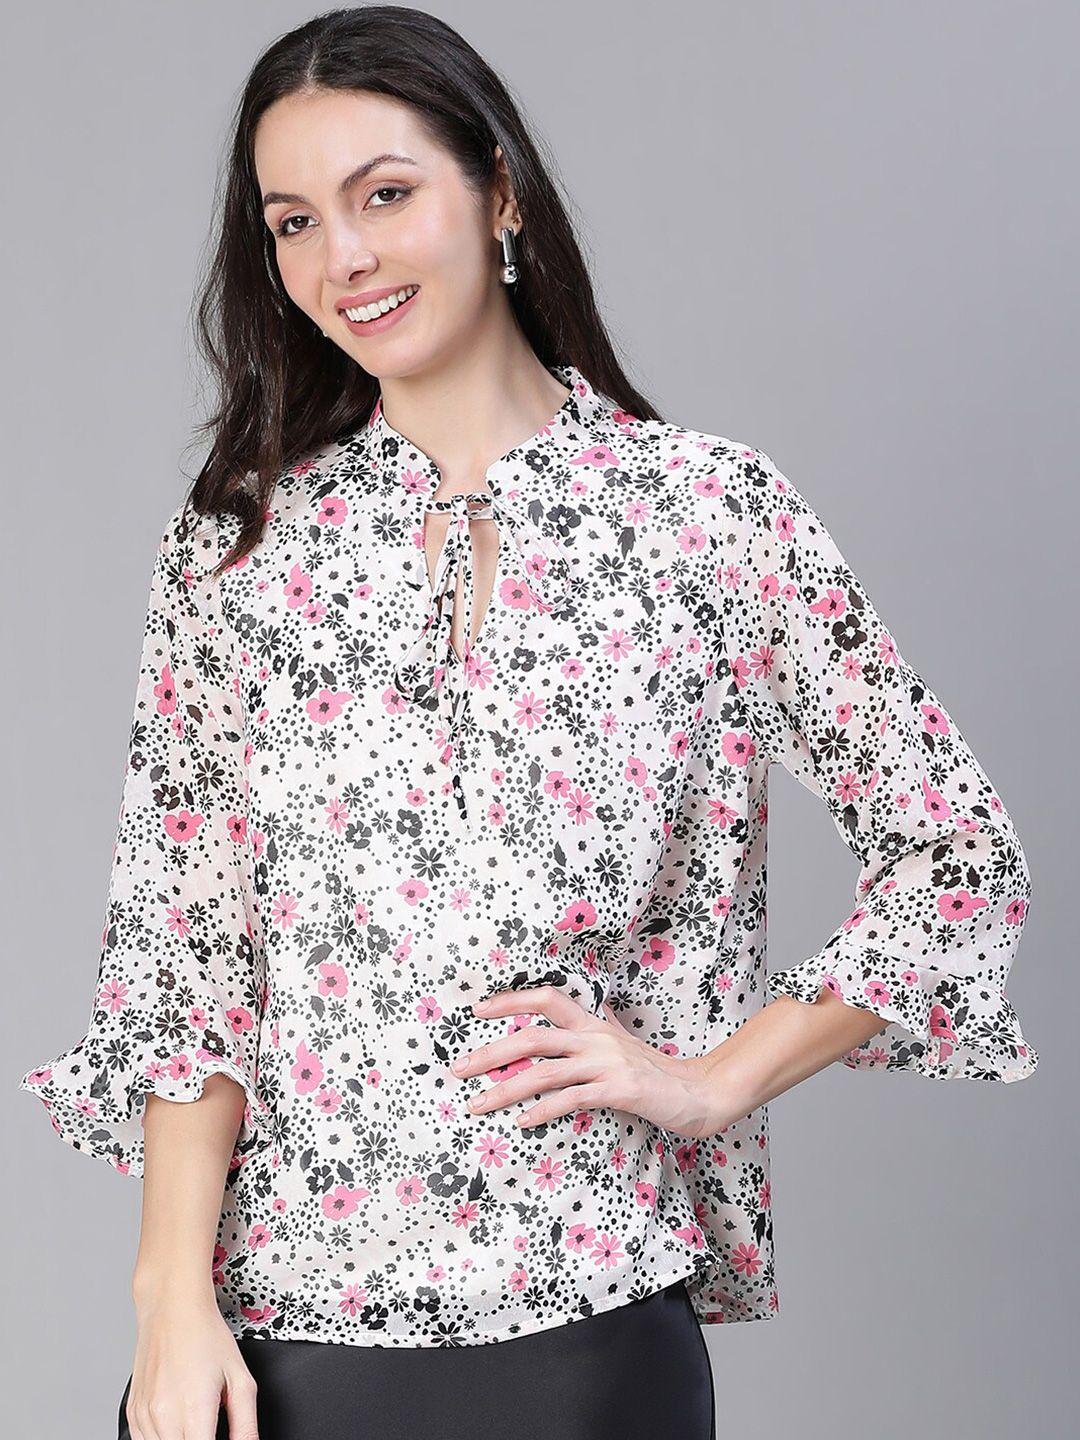 Oxolloxo Floral Printed Tie-Up Neck Georgette Top